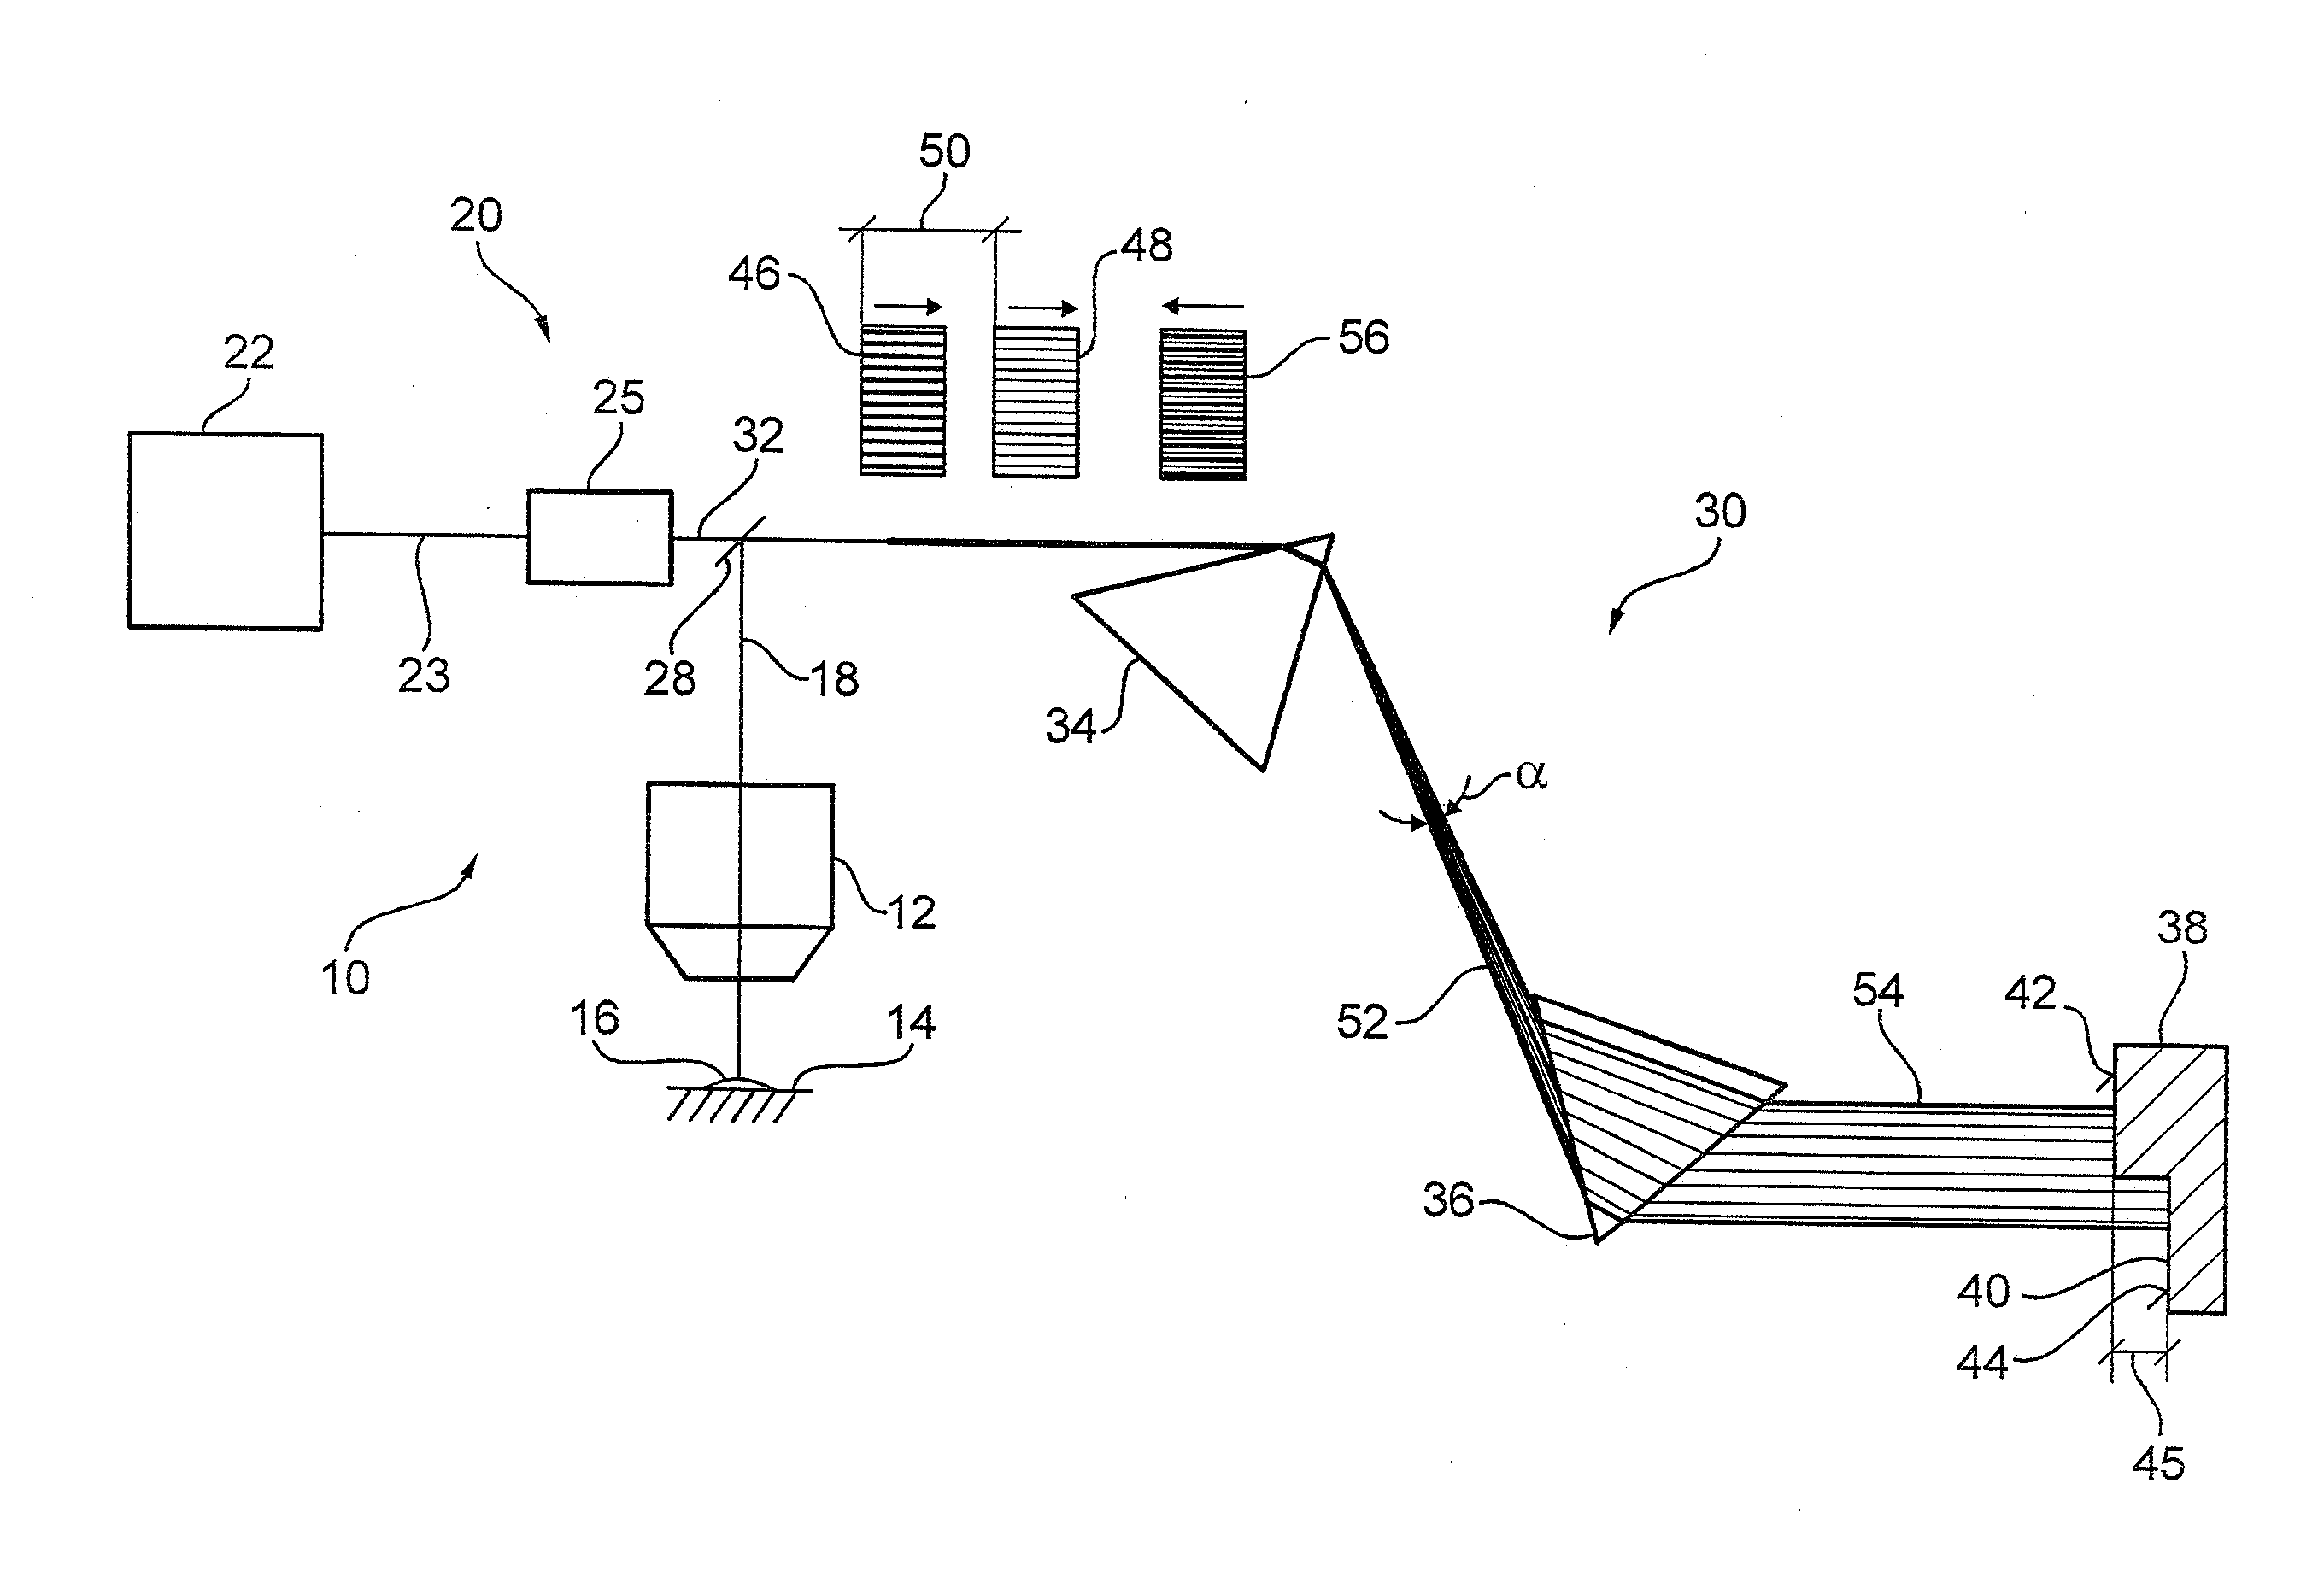 Apparatus for Temporal Displacement of White Light Laser Pulses